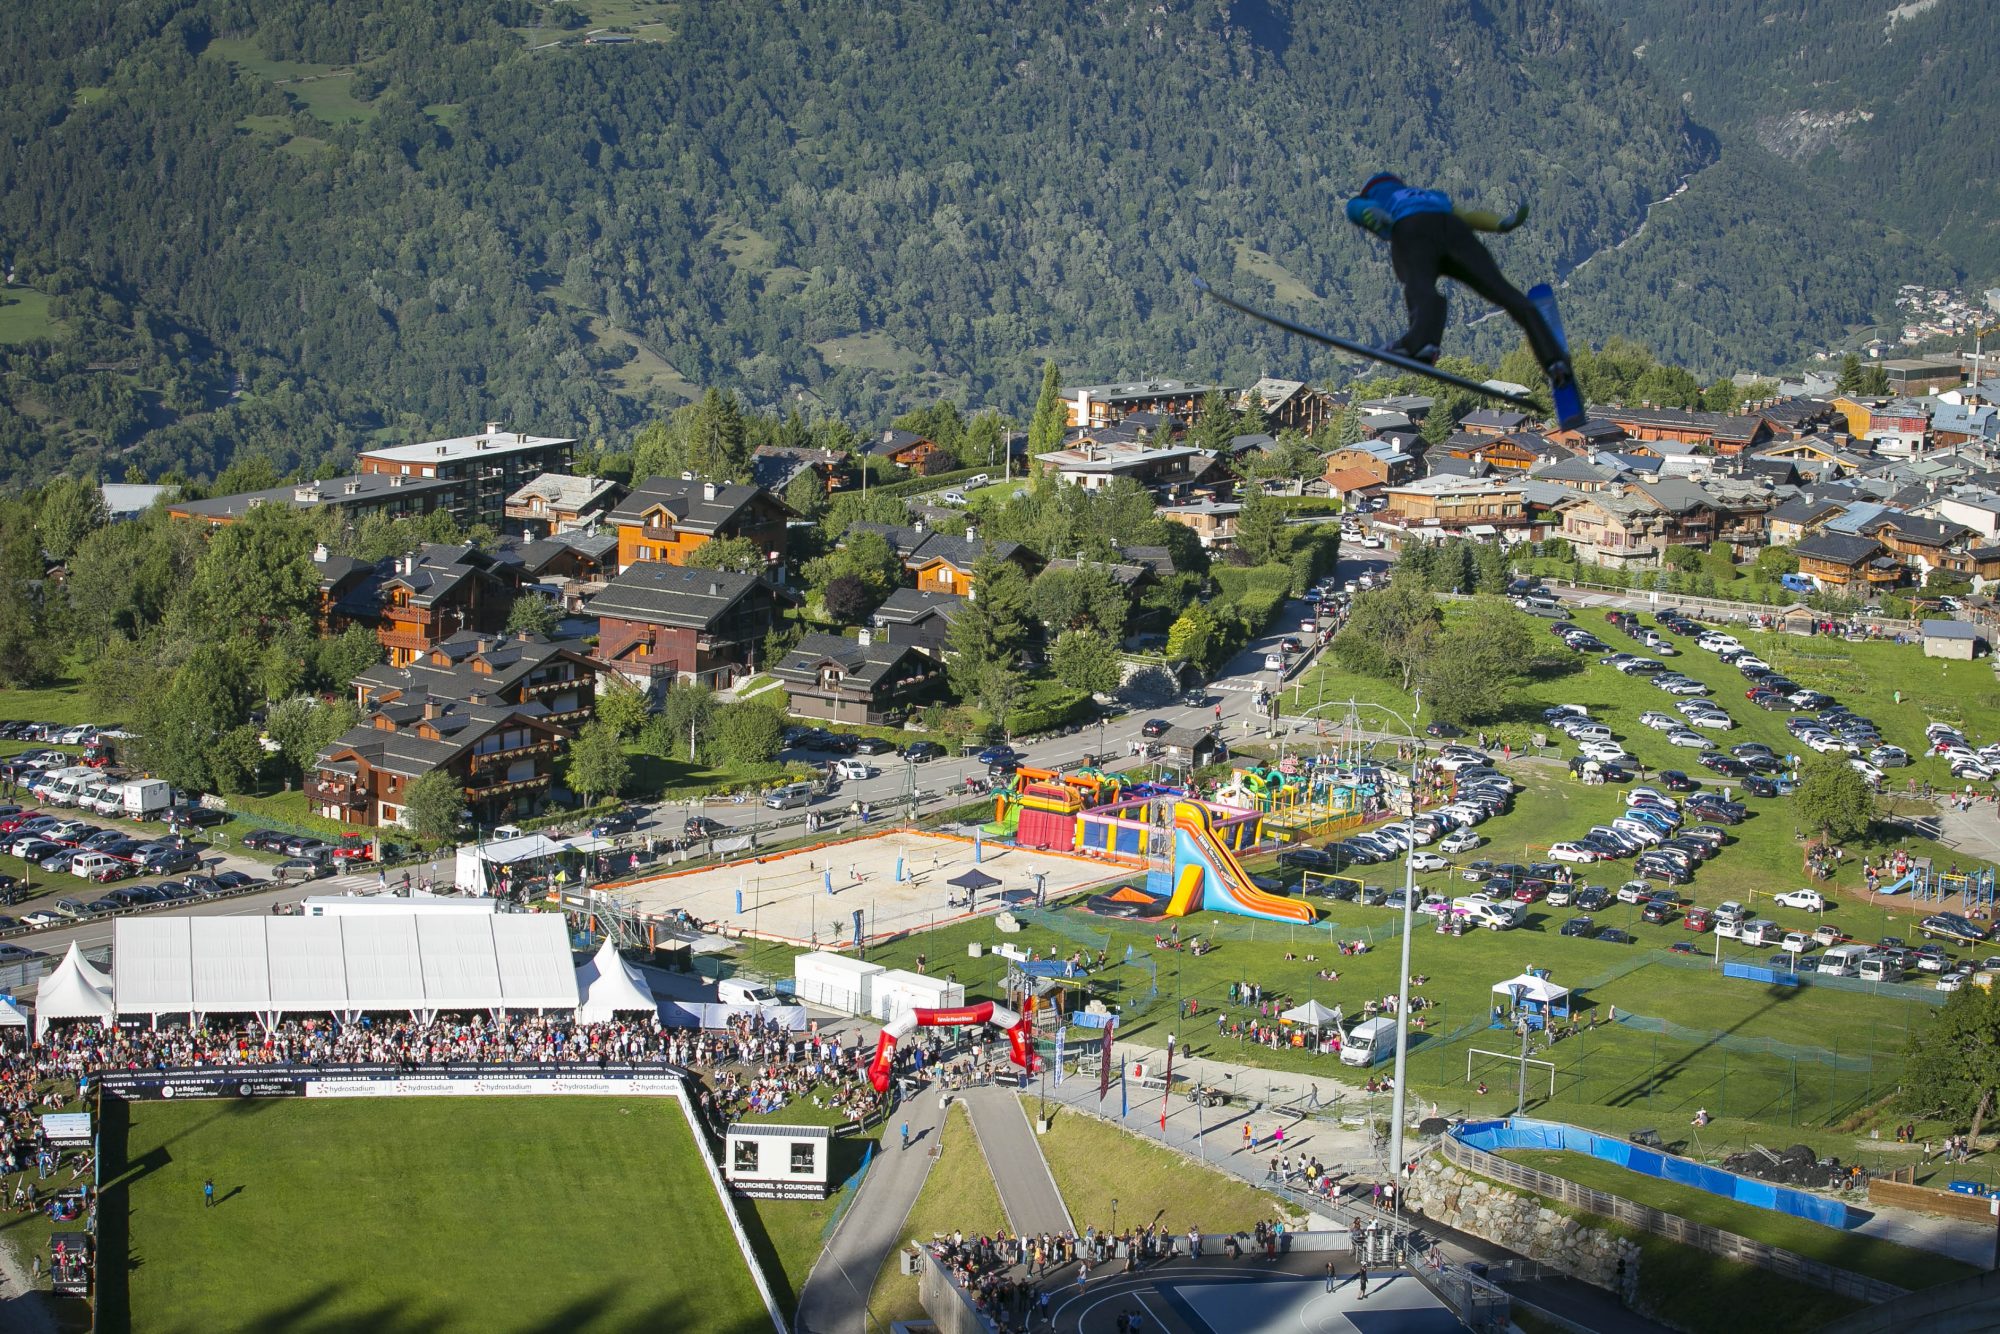 Summer Ski Jumping World Cup Coming to Courchevel